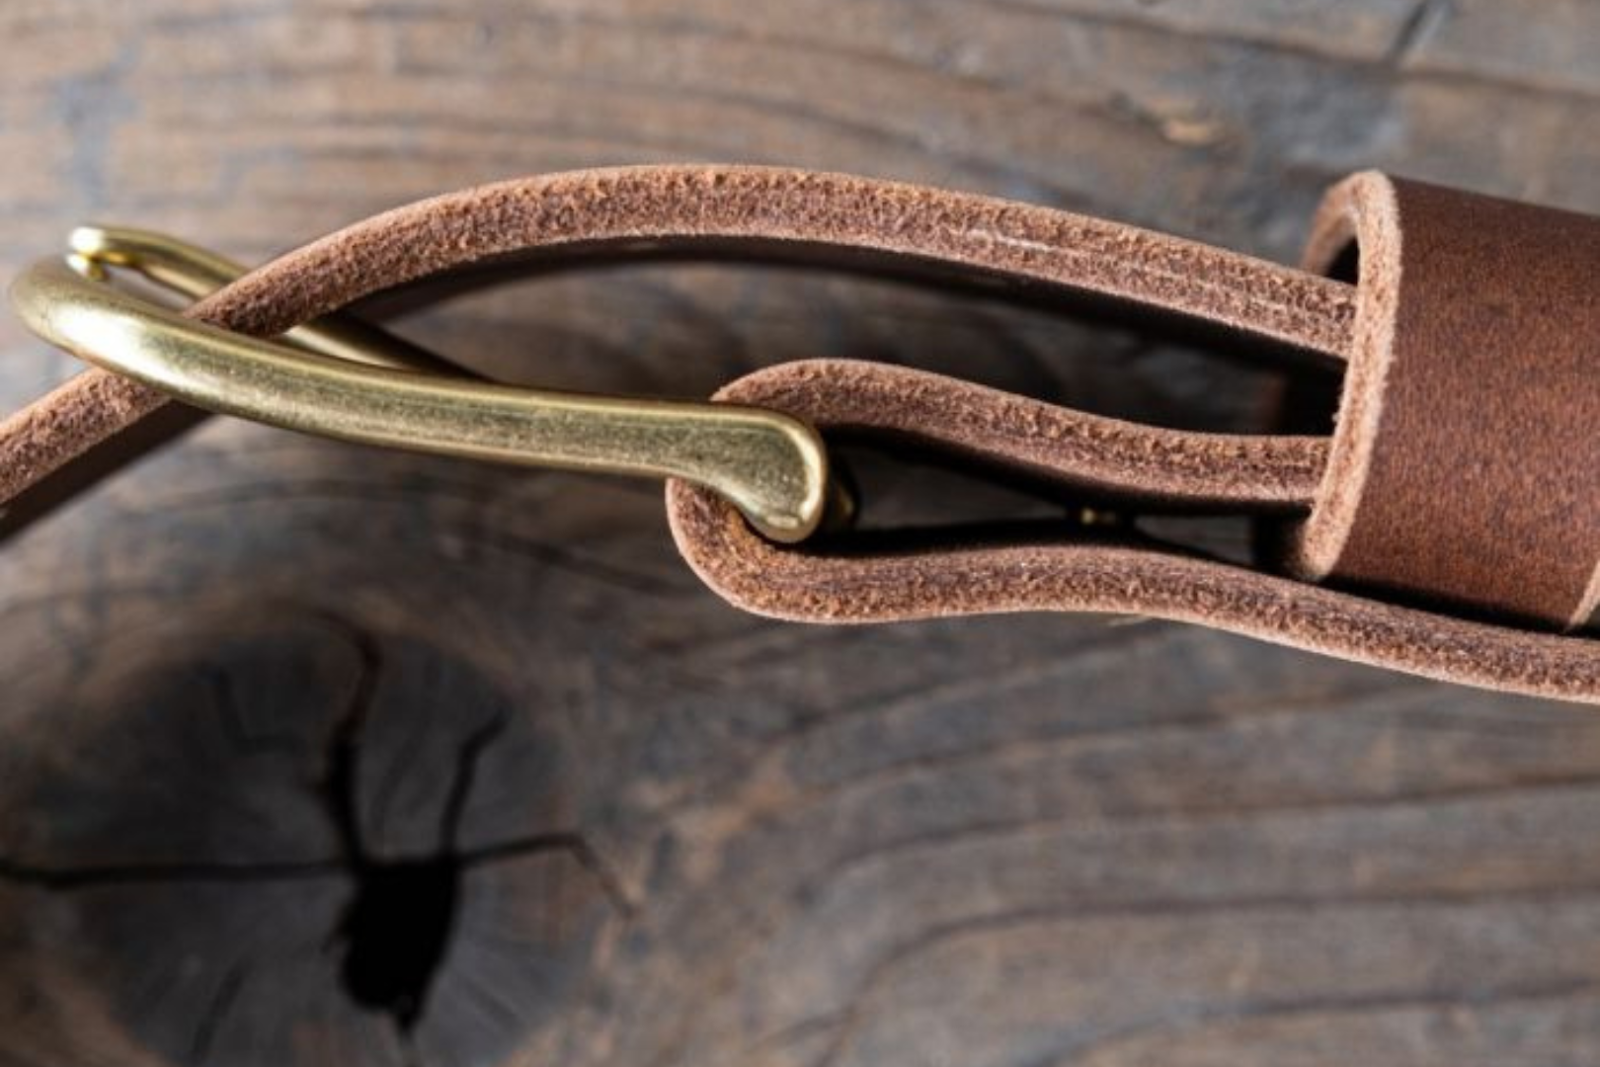  The Growing Demand for Sustainable and Ethical Leather Belts